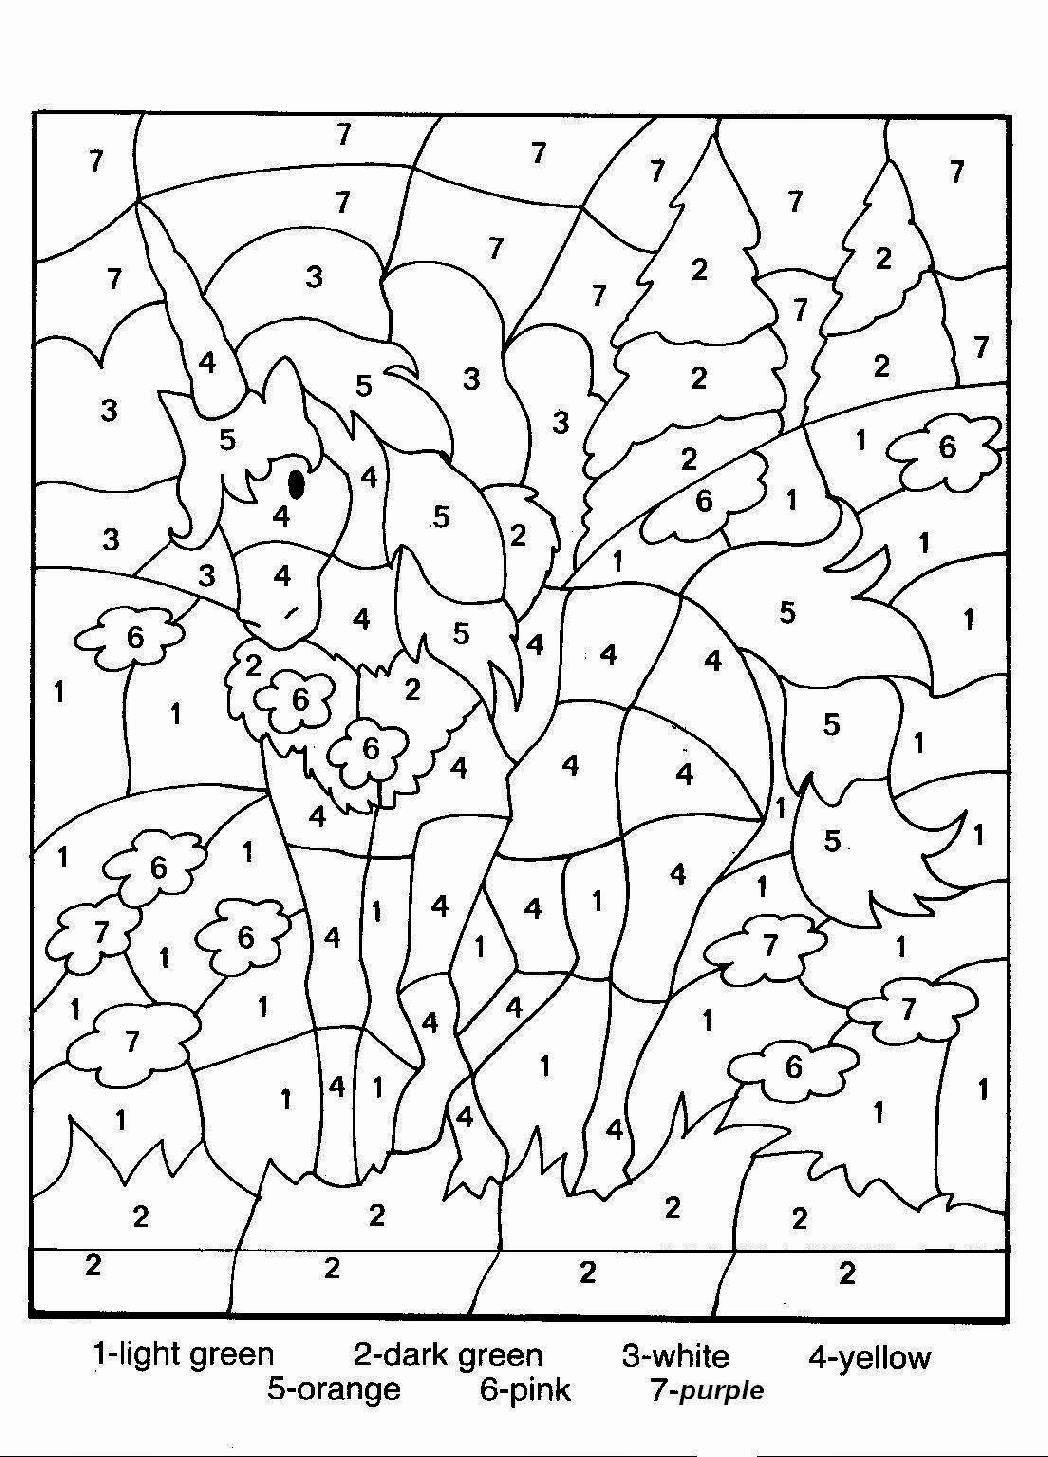 Coloring Pages : Marvelousristmas Math Coloring Picture